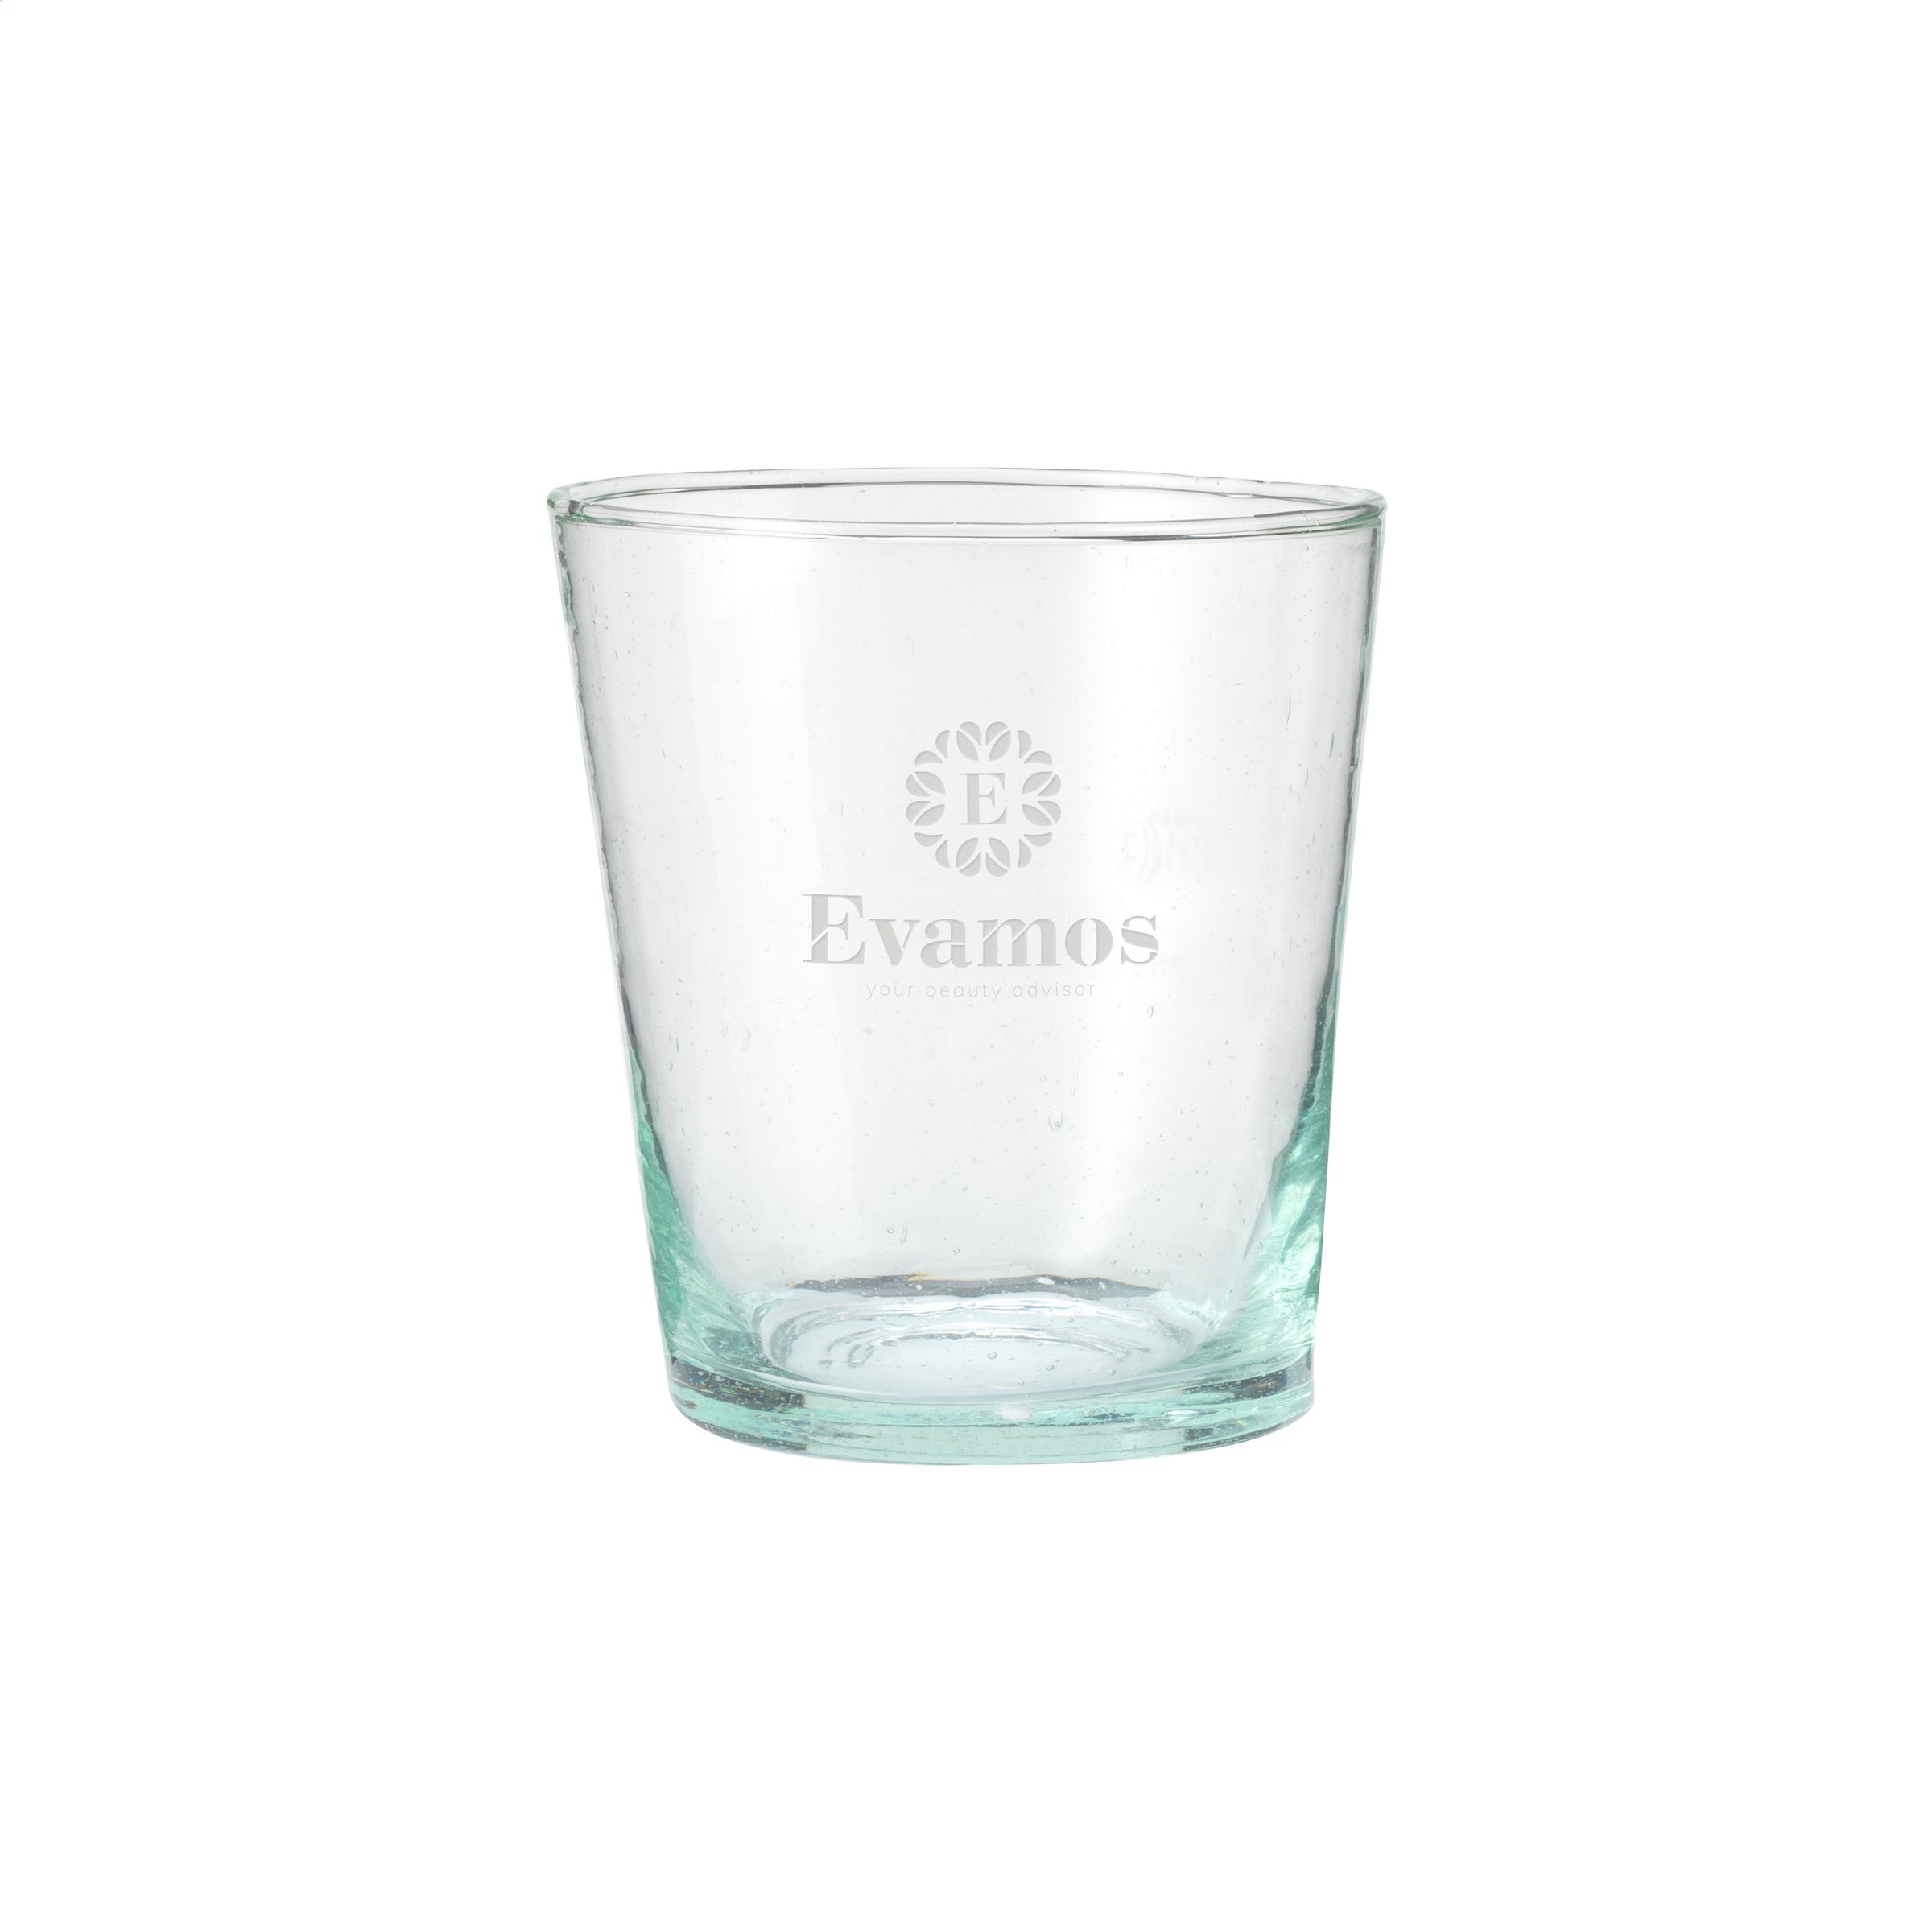 Water glass made from recycled glass - Hampstead